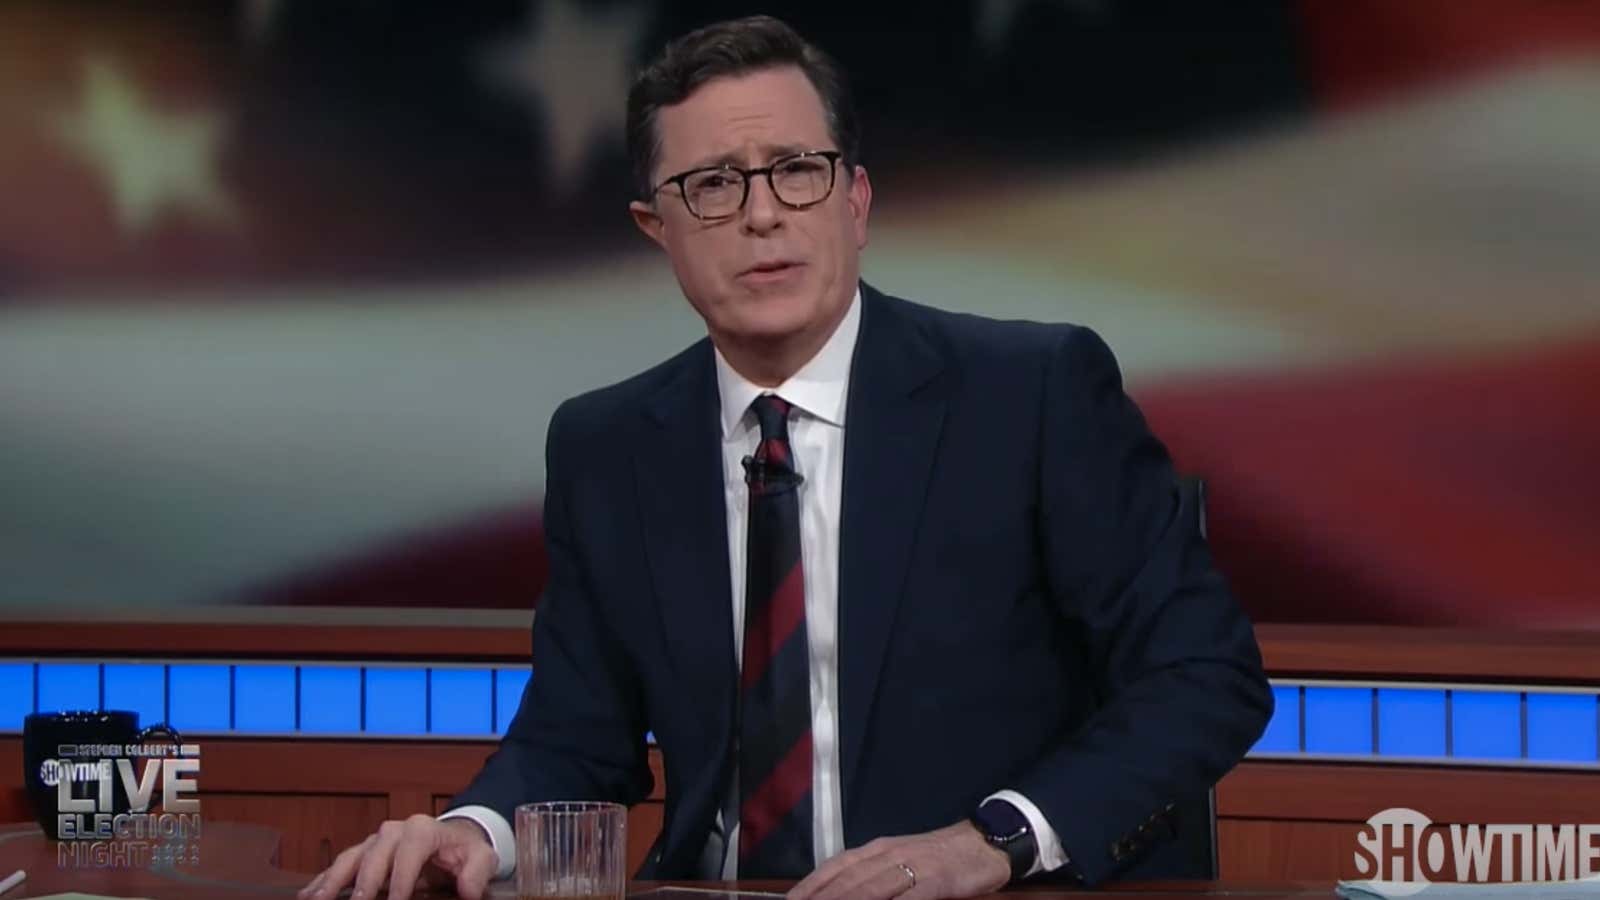 Showtime viewers leaned on the comedy of Stephen Colbert last night.